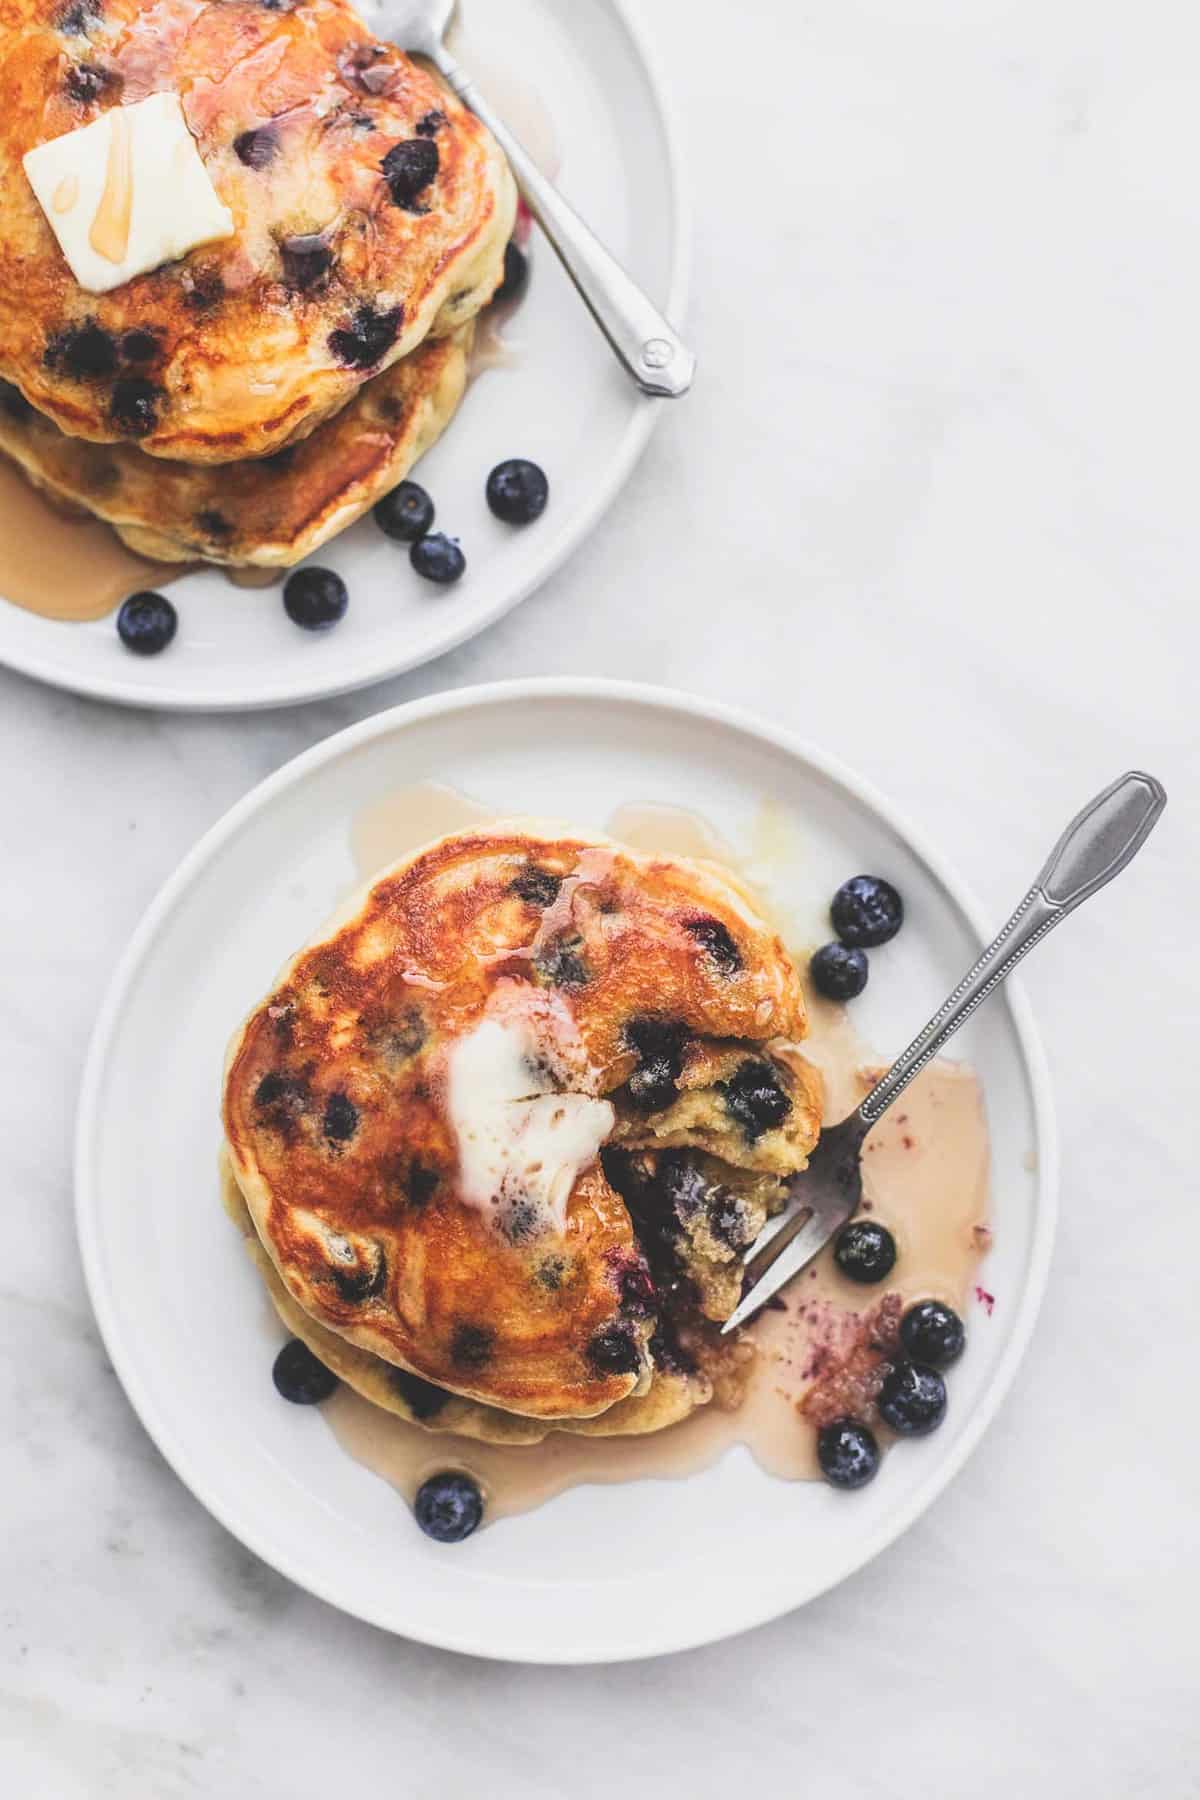 top view of a stack of blueberry pancakes with a fork underneath a bite with another plate of pancakes on the side.